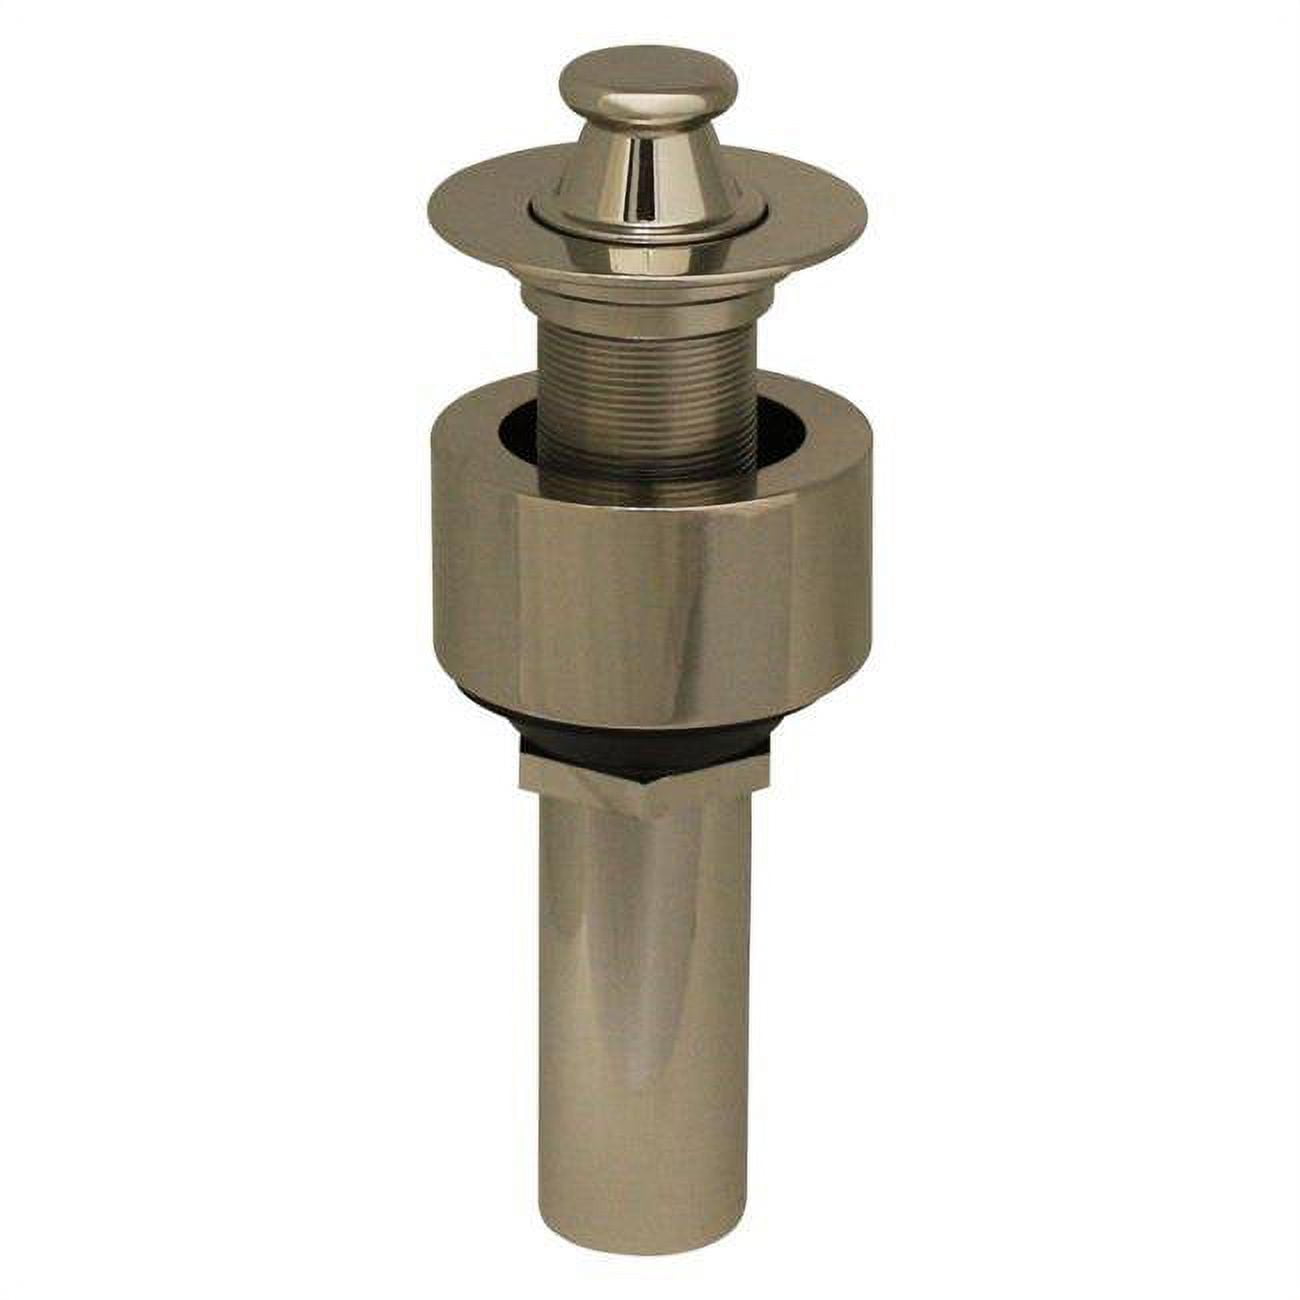 10.615-pn Lift & Turn Drain With A Pull-up Plug For Above Mount Installation - Polished Nickel